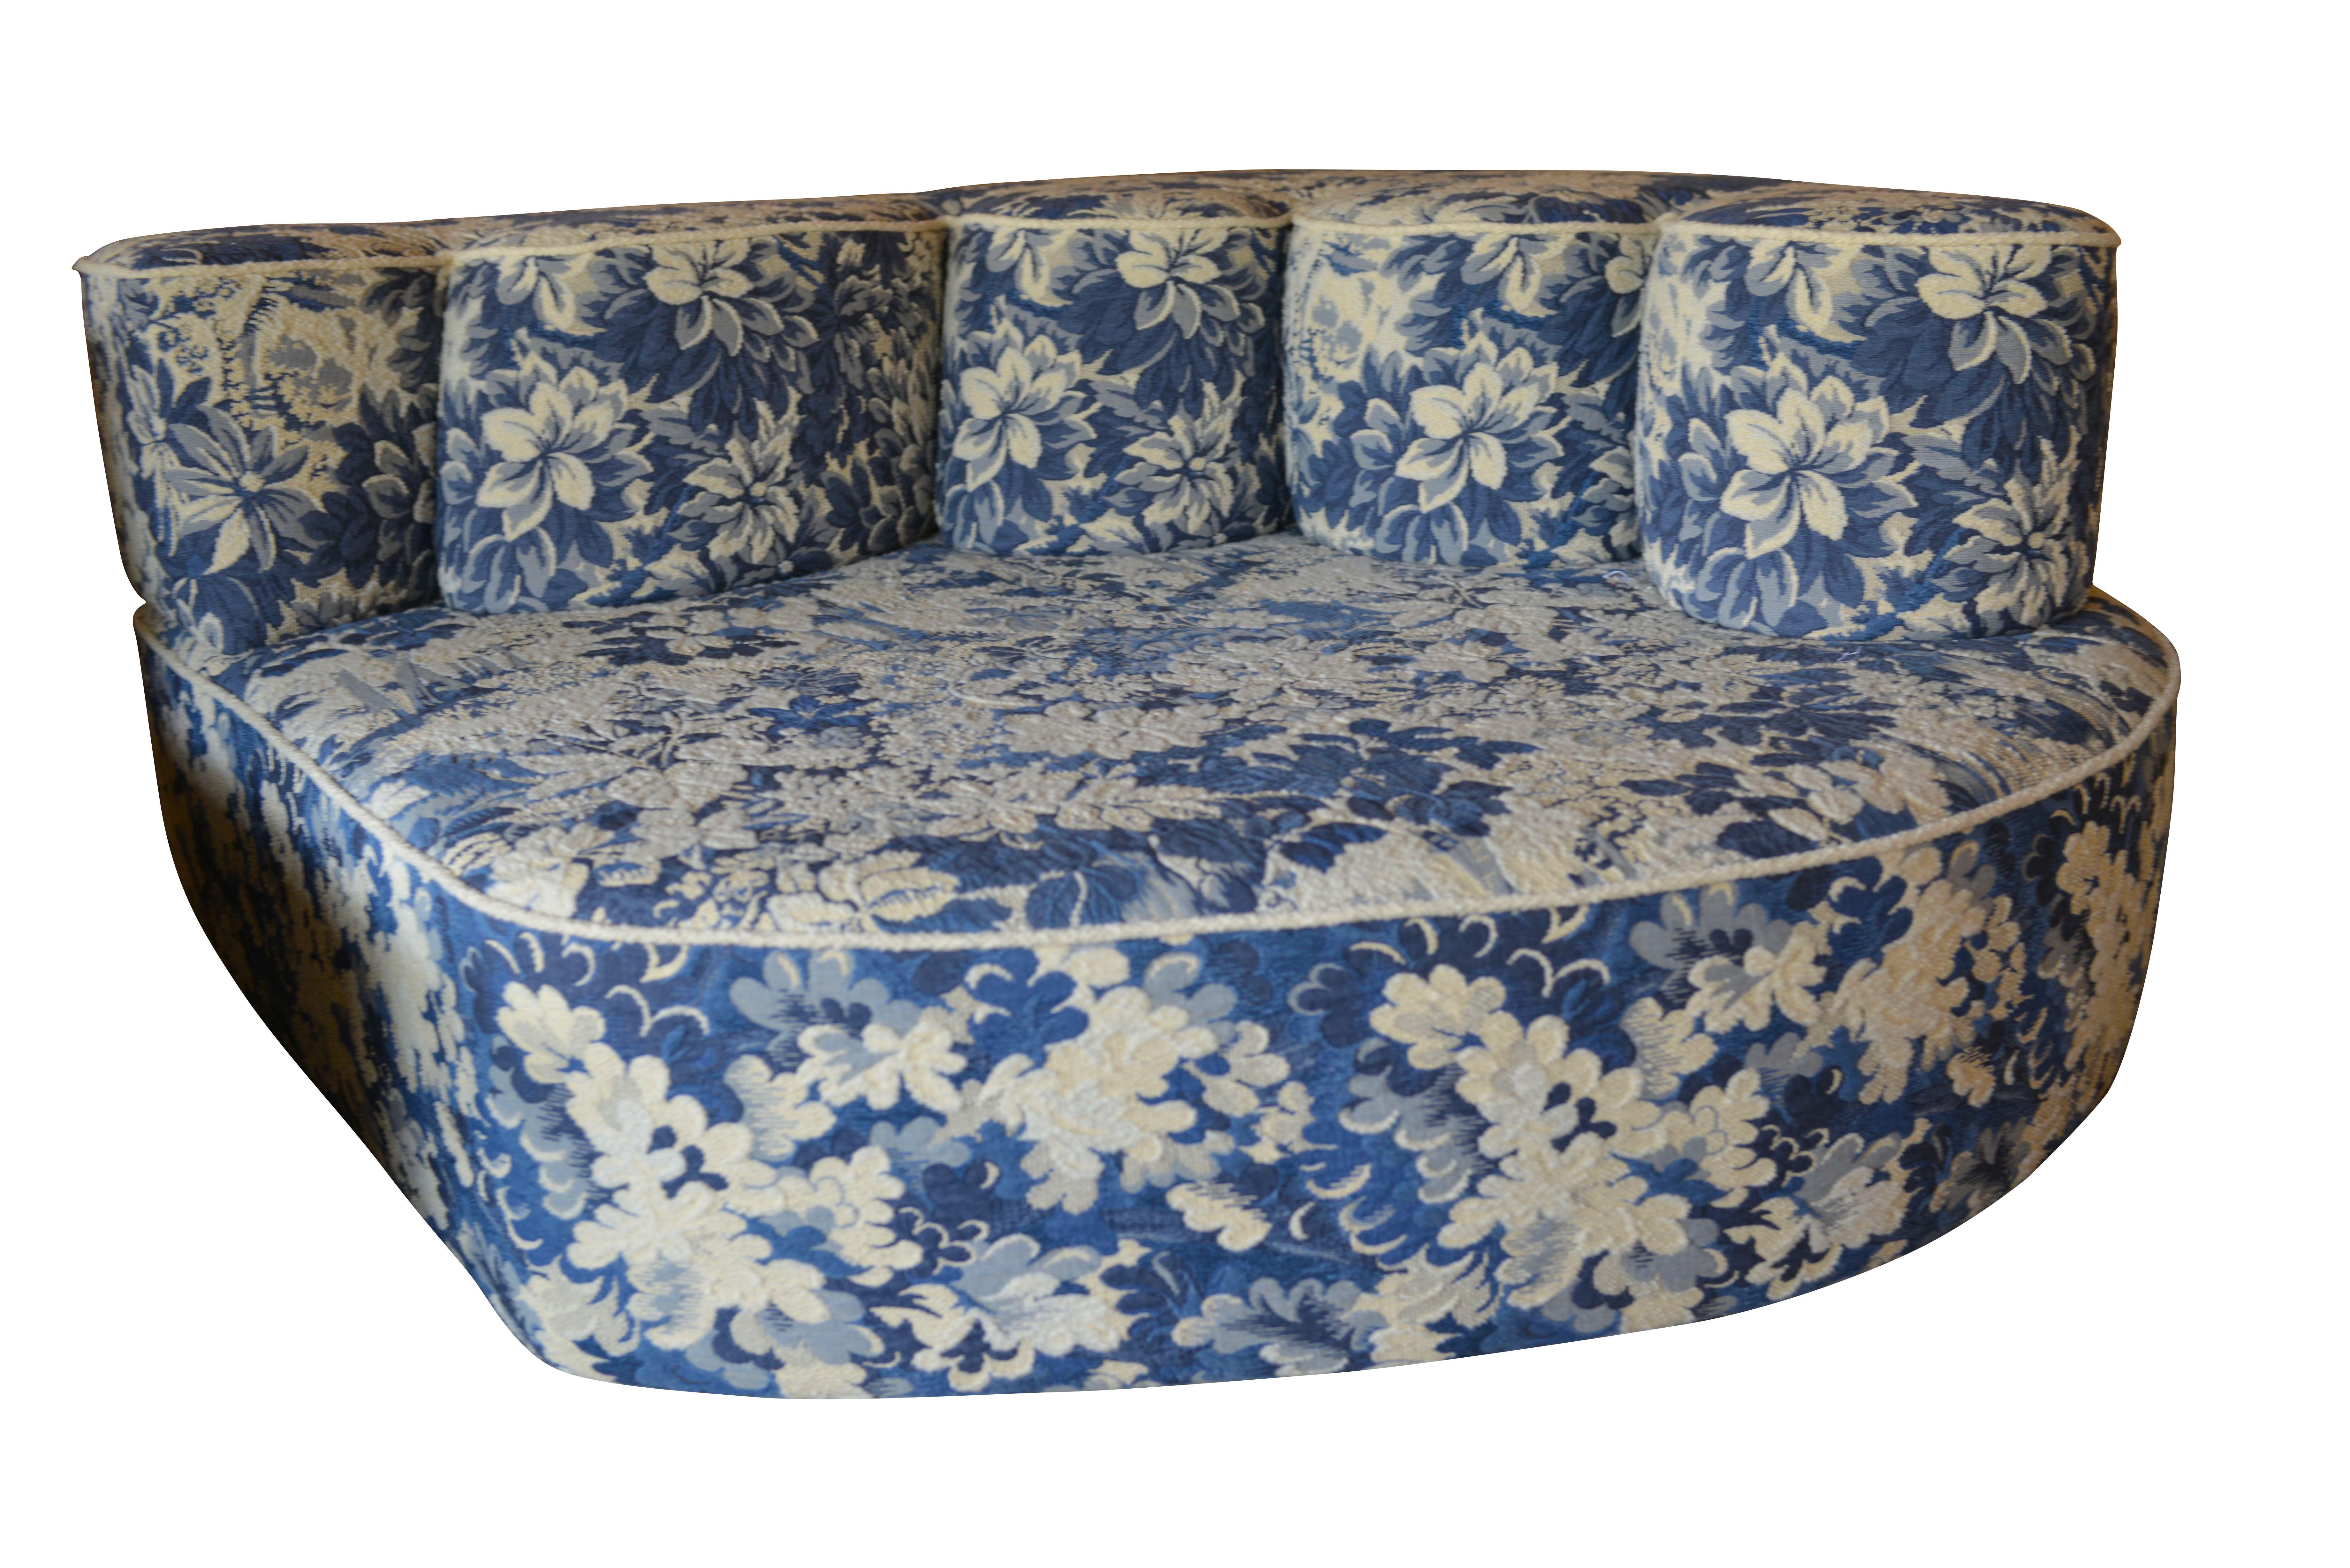 Fabric JPDemeyer Home Collection Comporta Modular Foam Sofa in Blue Verdure Tapestry For Sale